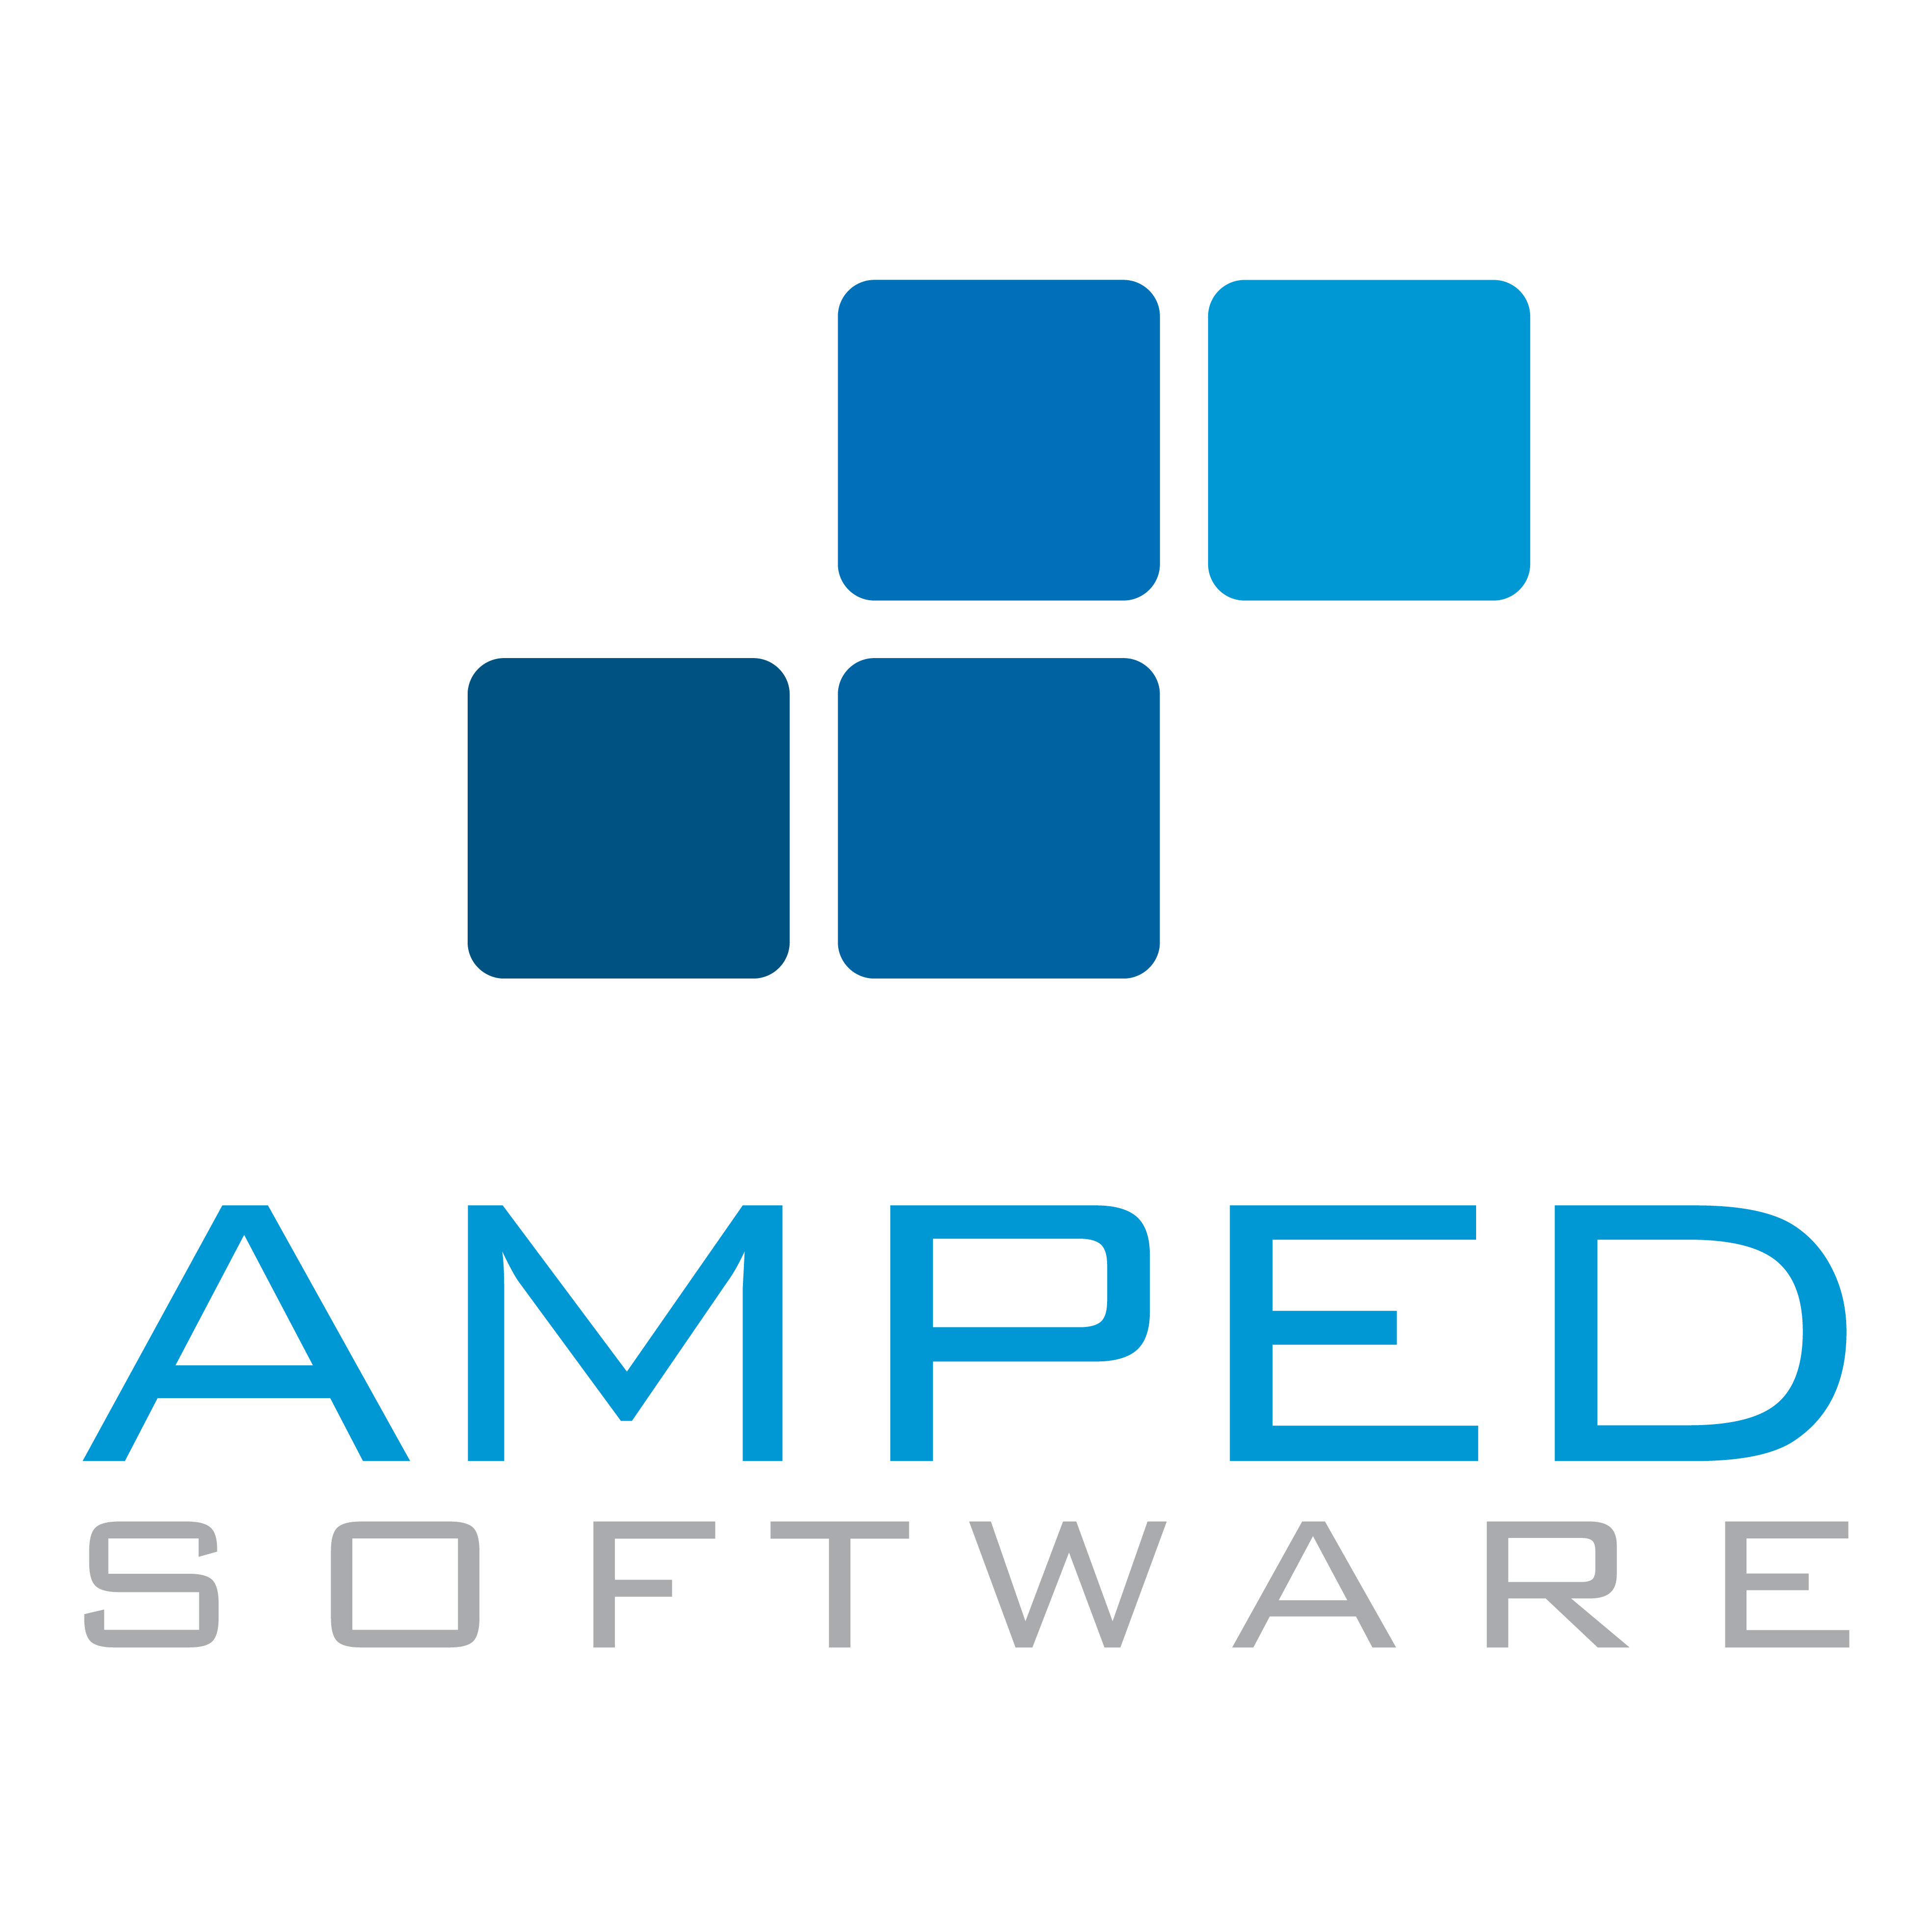 amped software download free